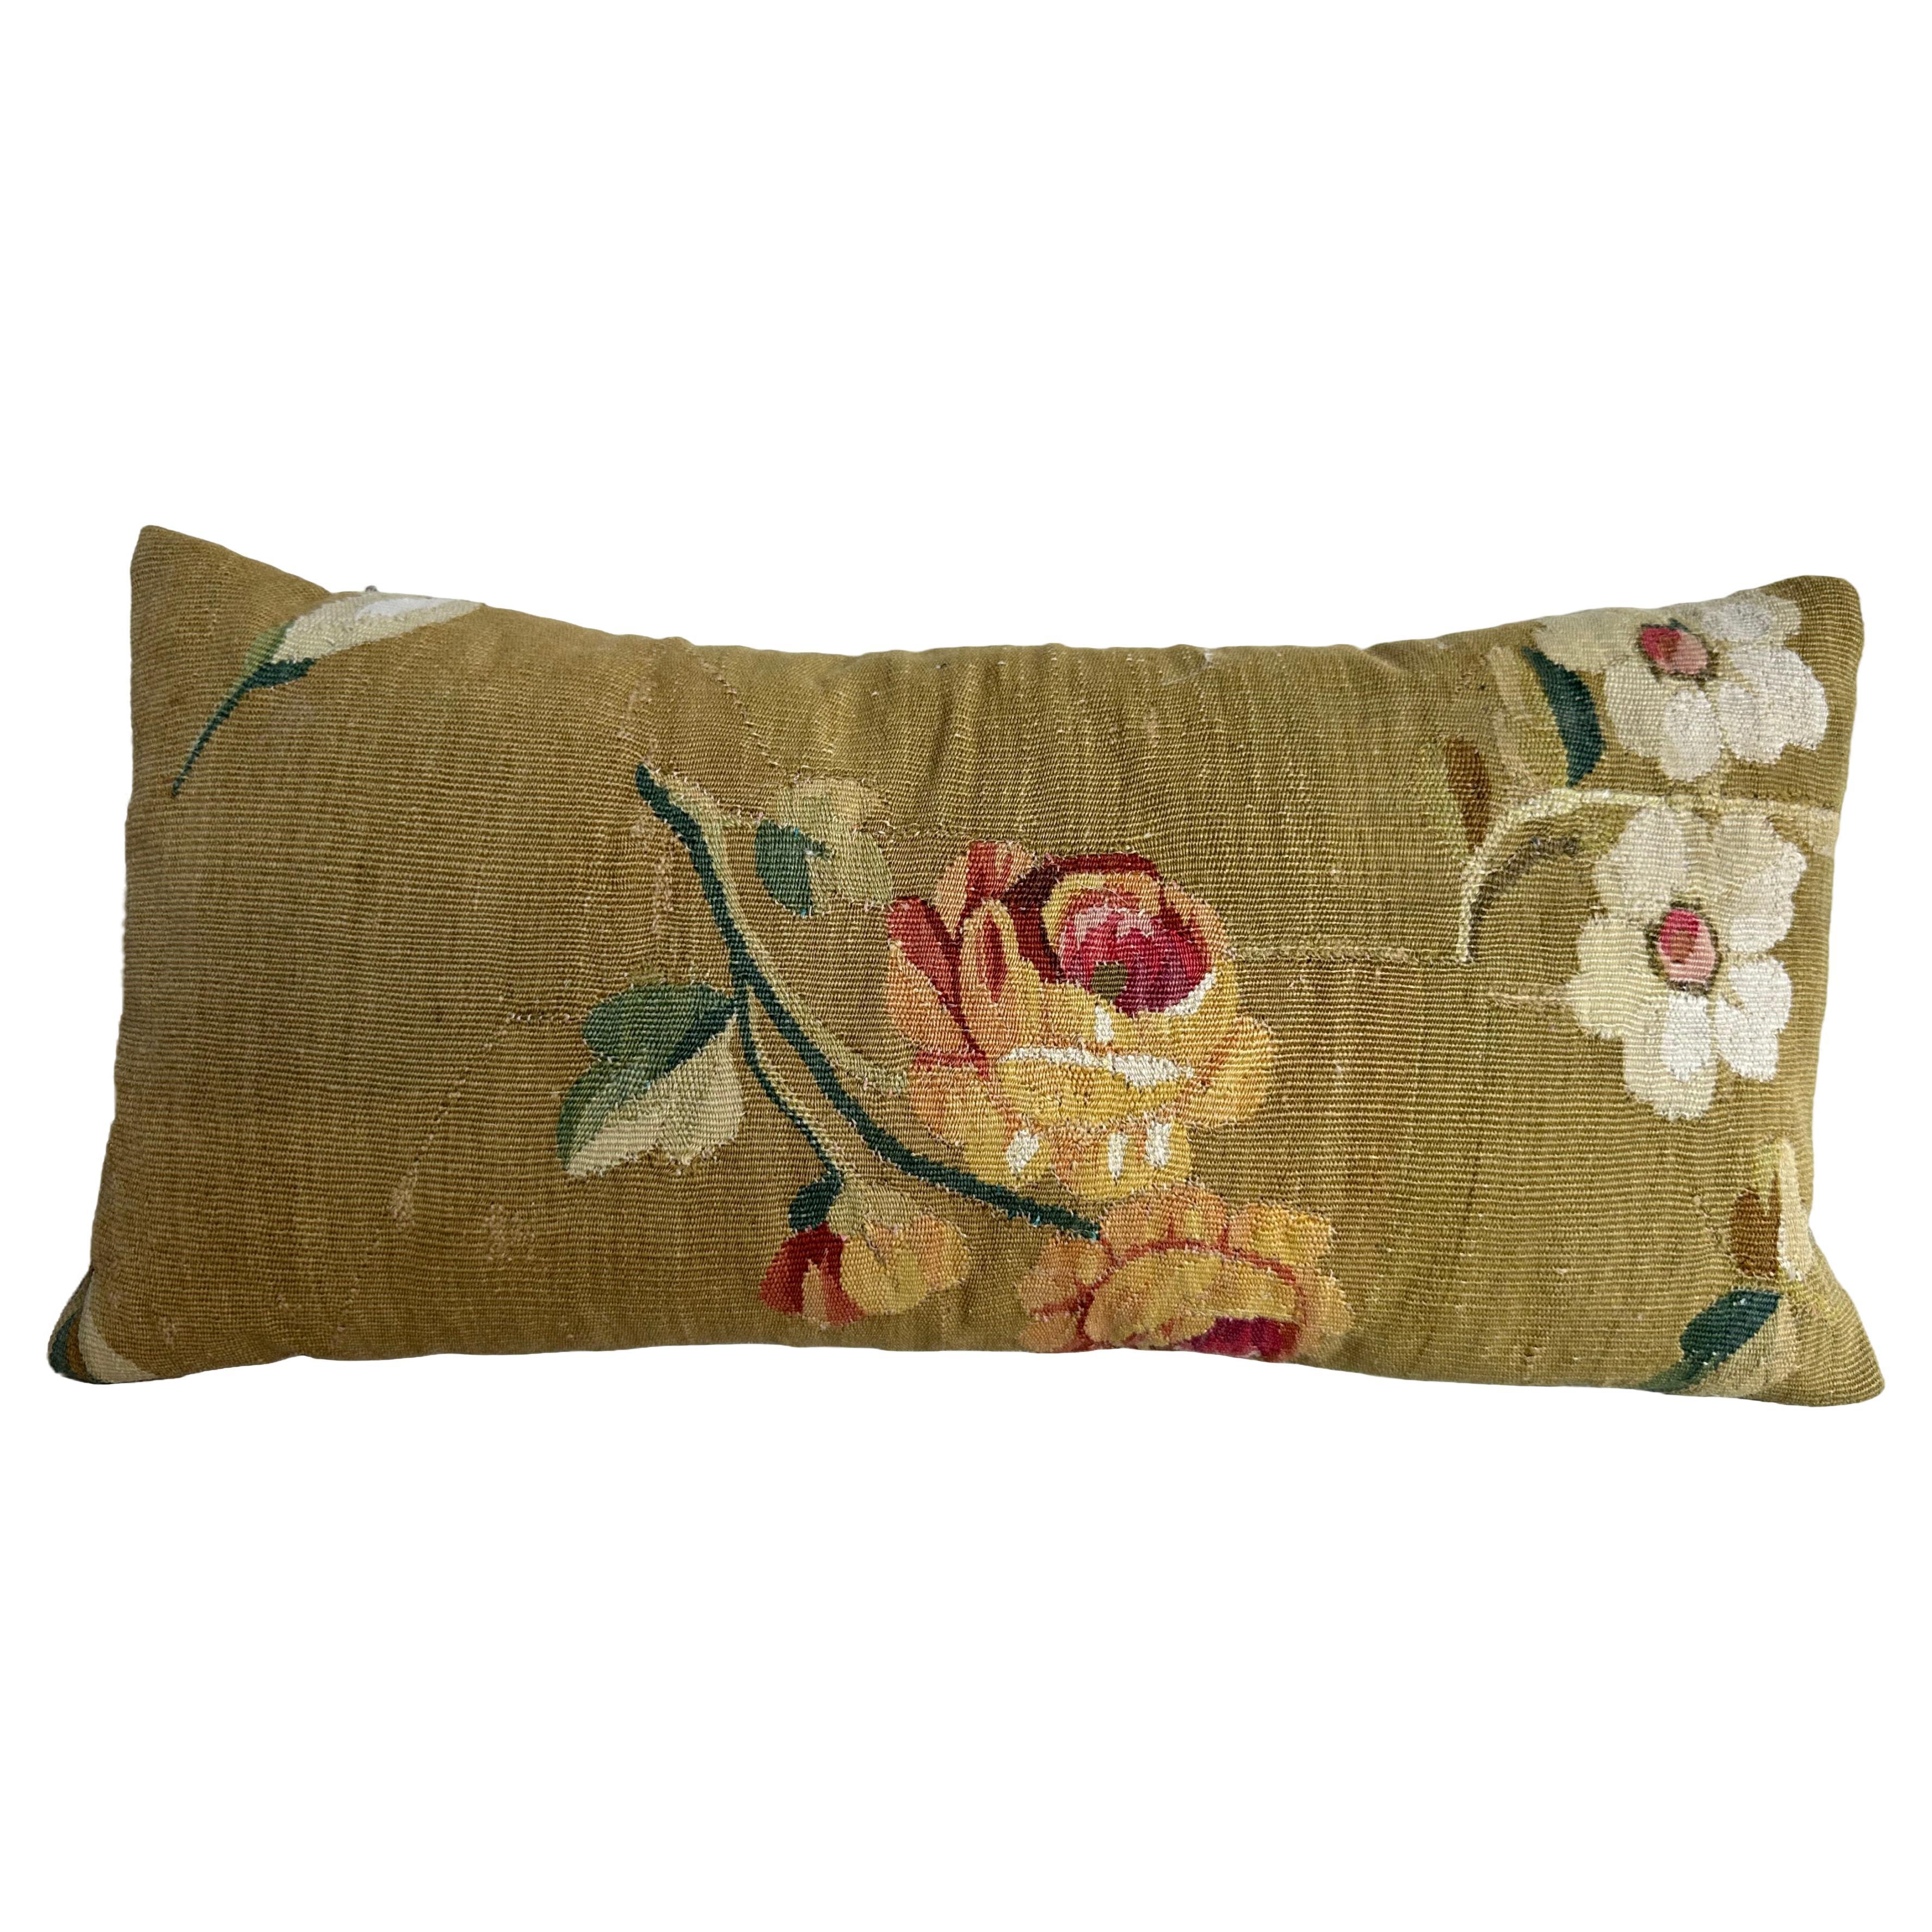 Antique French Aubusson Pillow - 18" X 8" For Sale